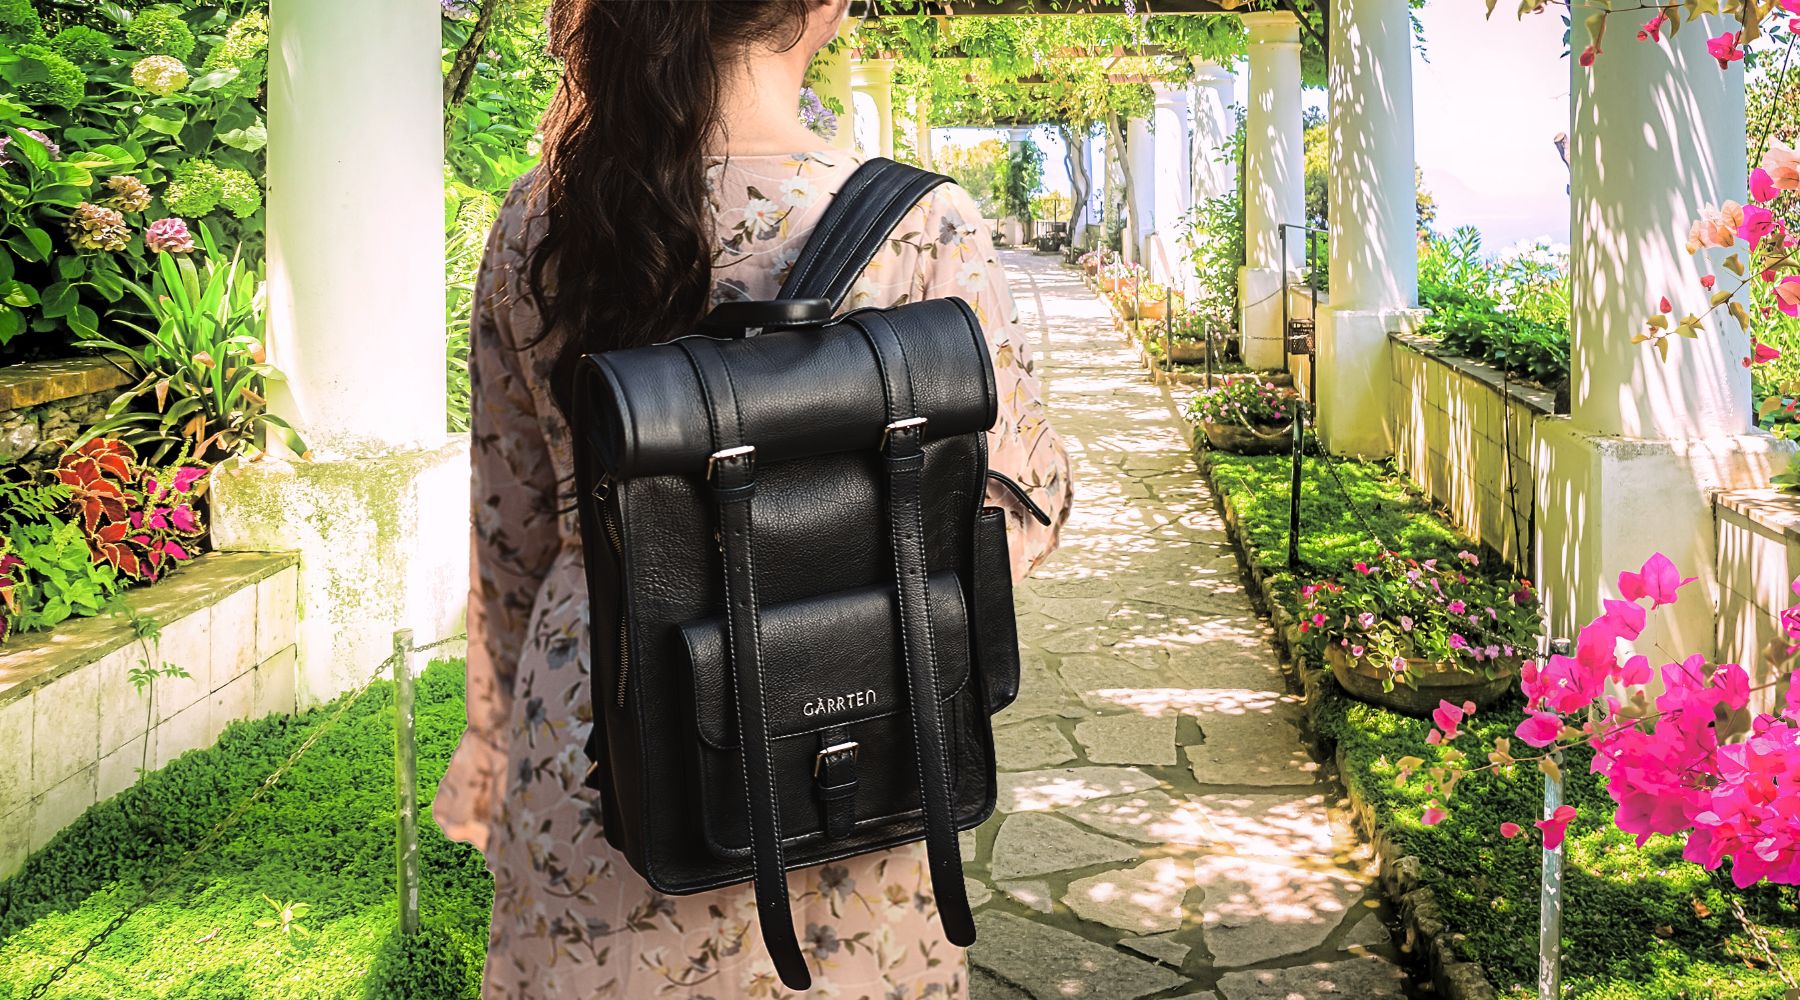 girl holding rolltop style leather backpack by garrten in carbon black. girl is on path in a garden.